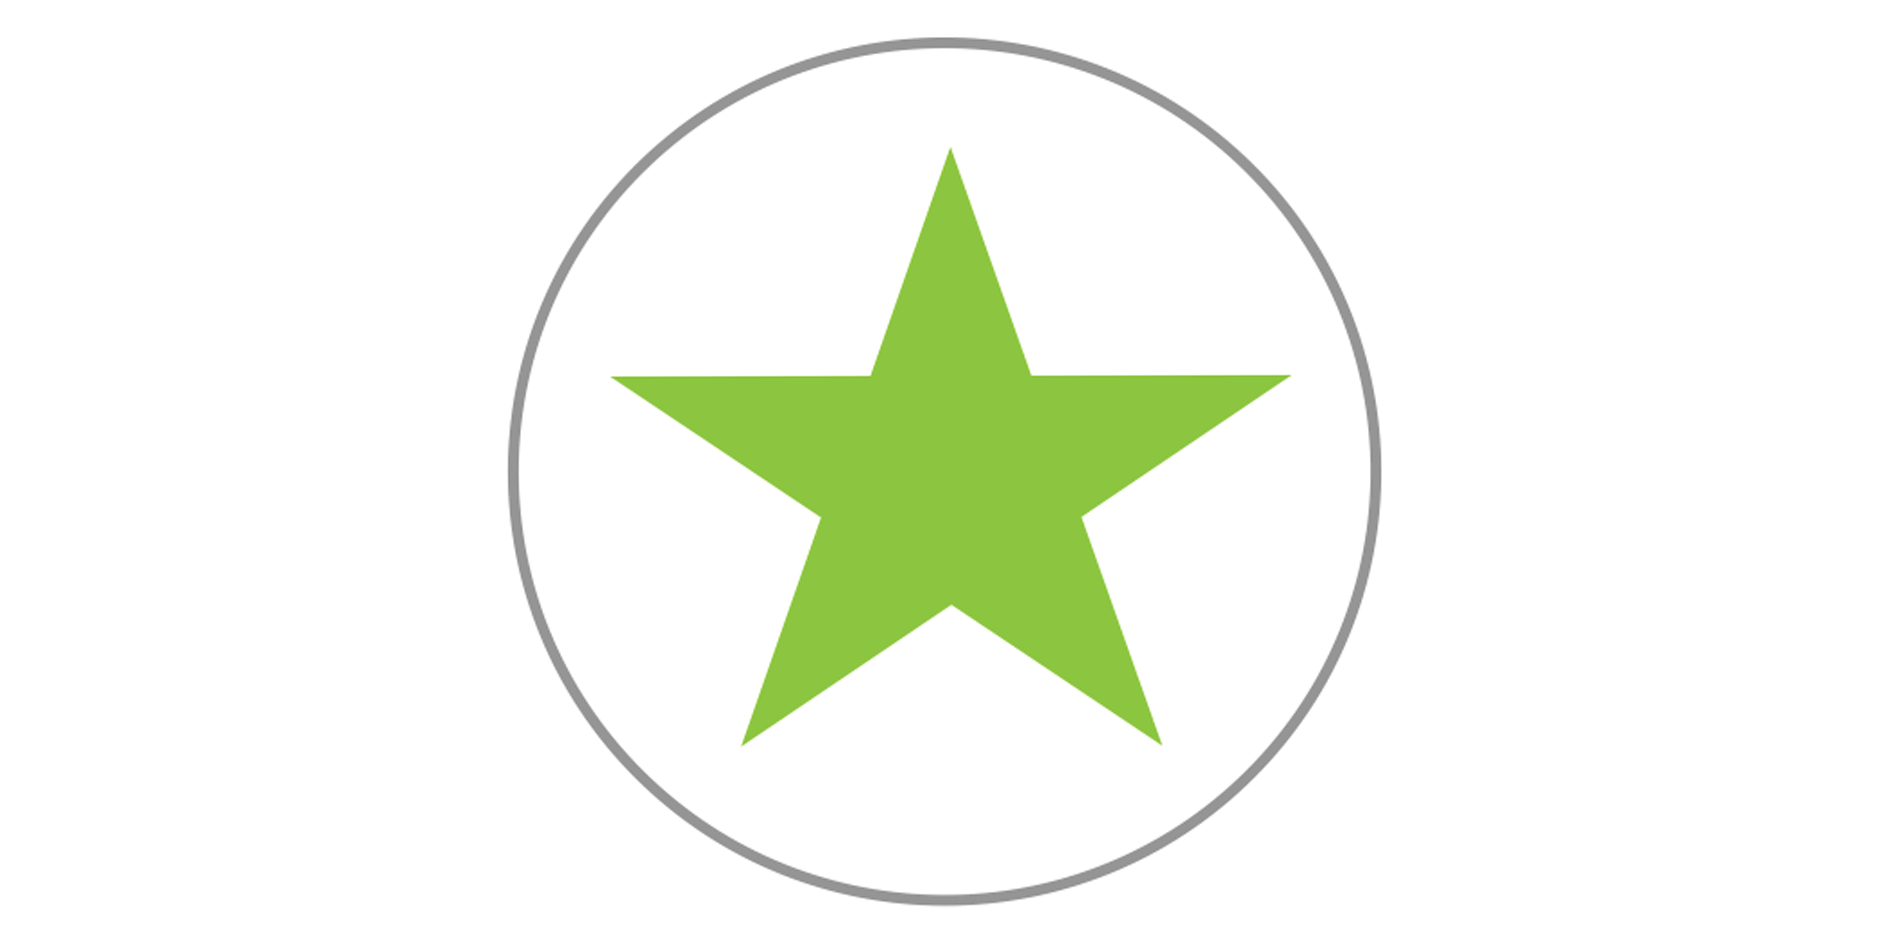 A small green icon of a star.